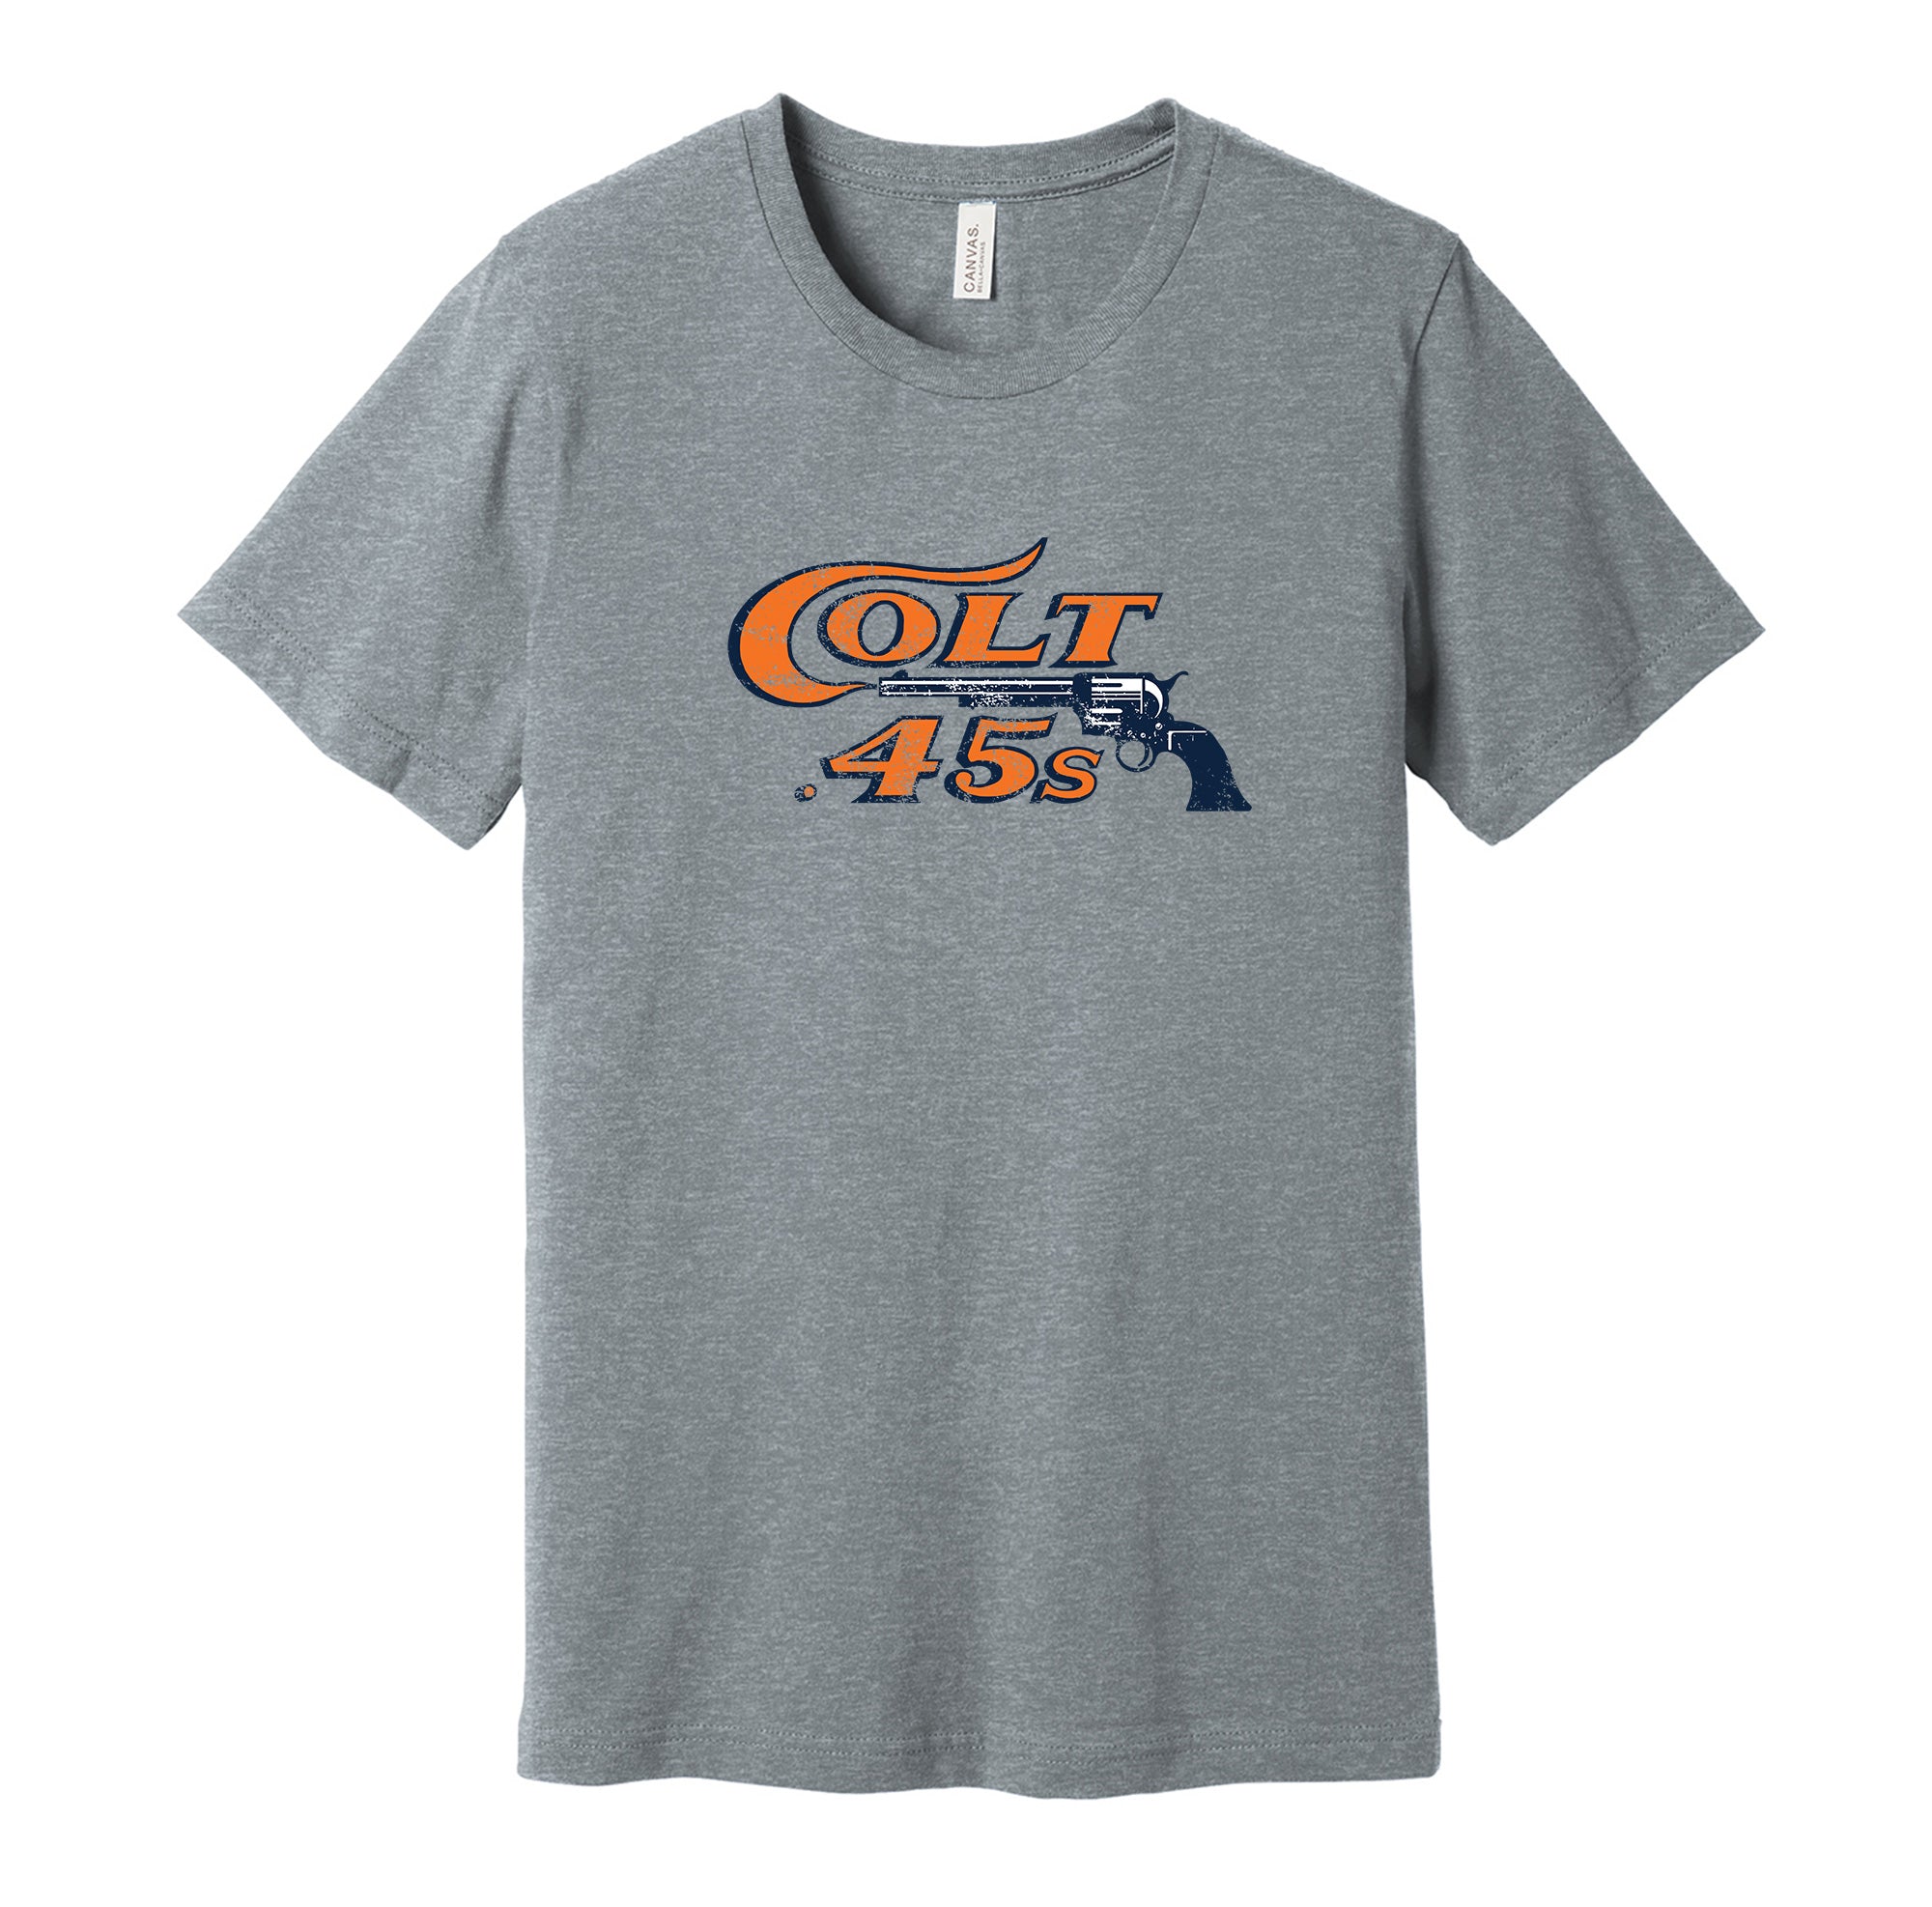 Houston Astros on X: Colt .45s jerseys are available in the Team Store!  Not in Houston? Check out other deals on    / X